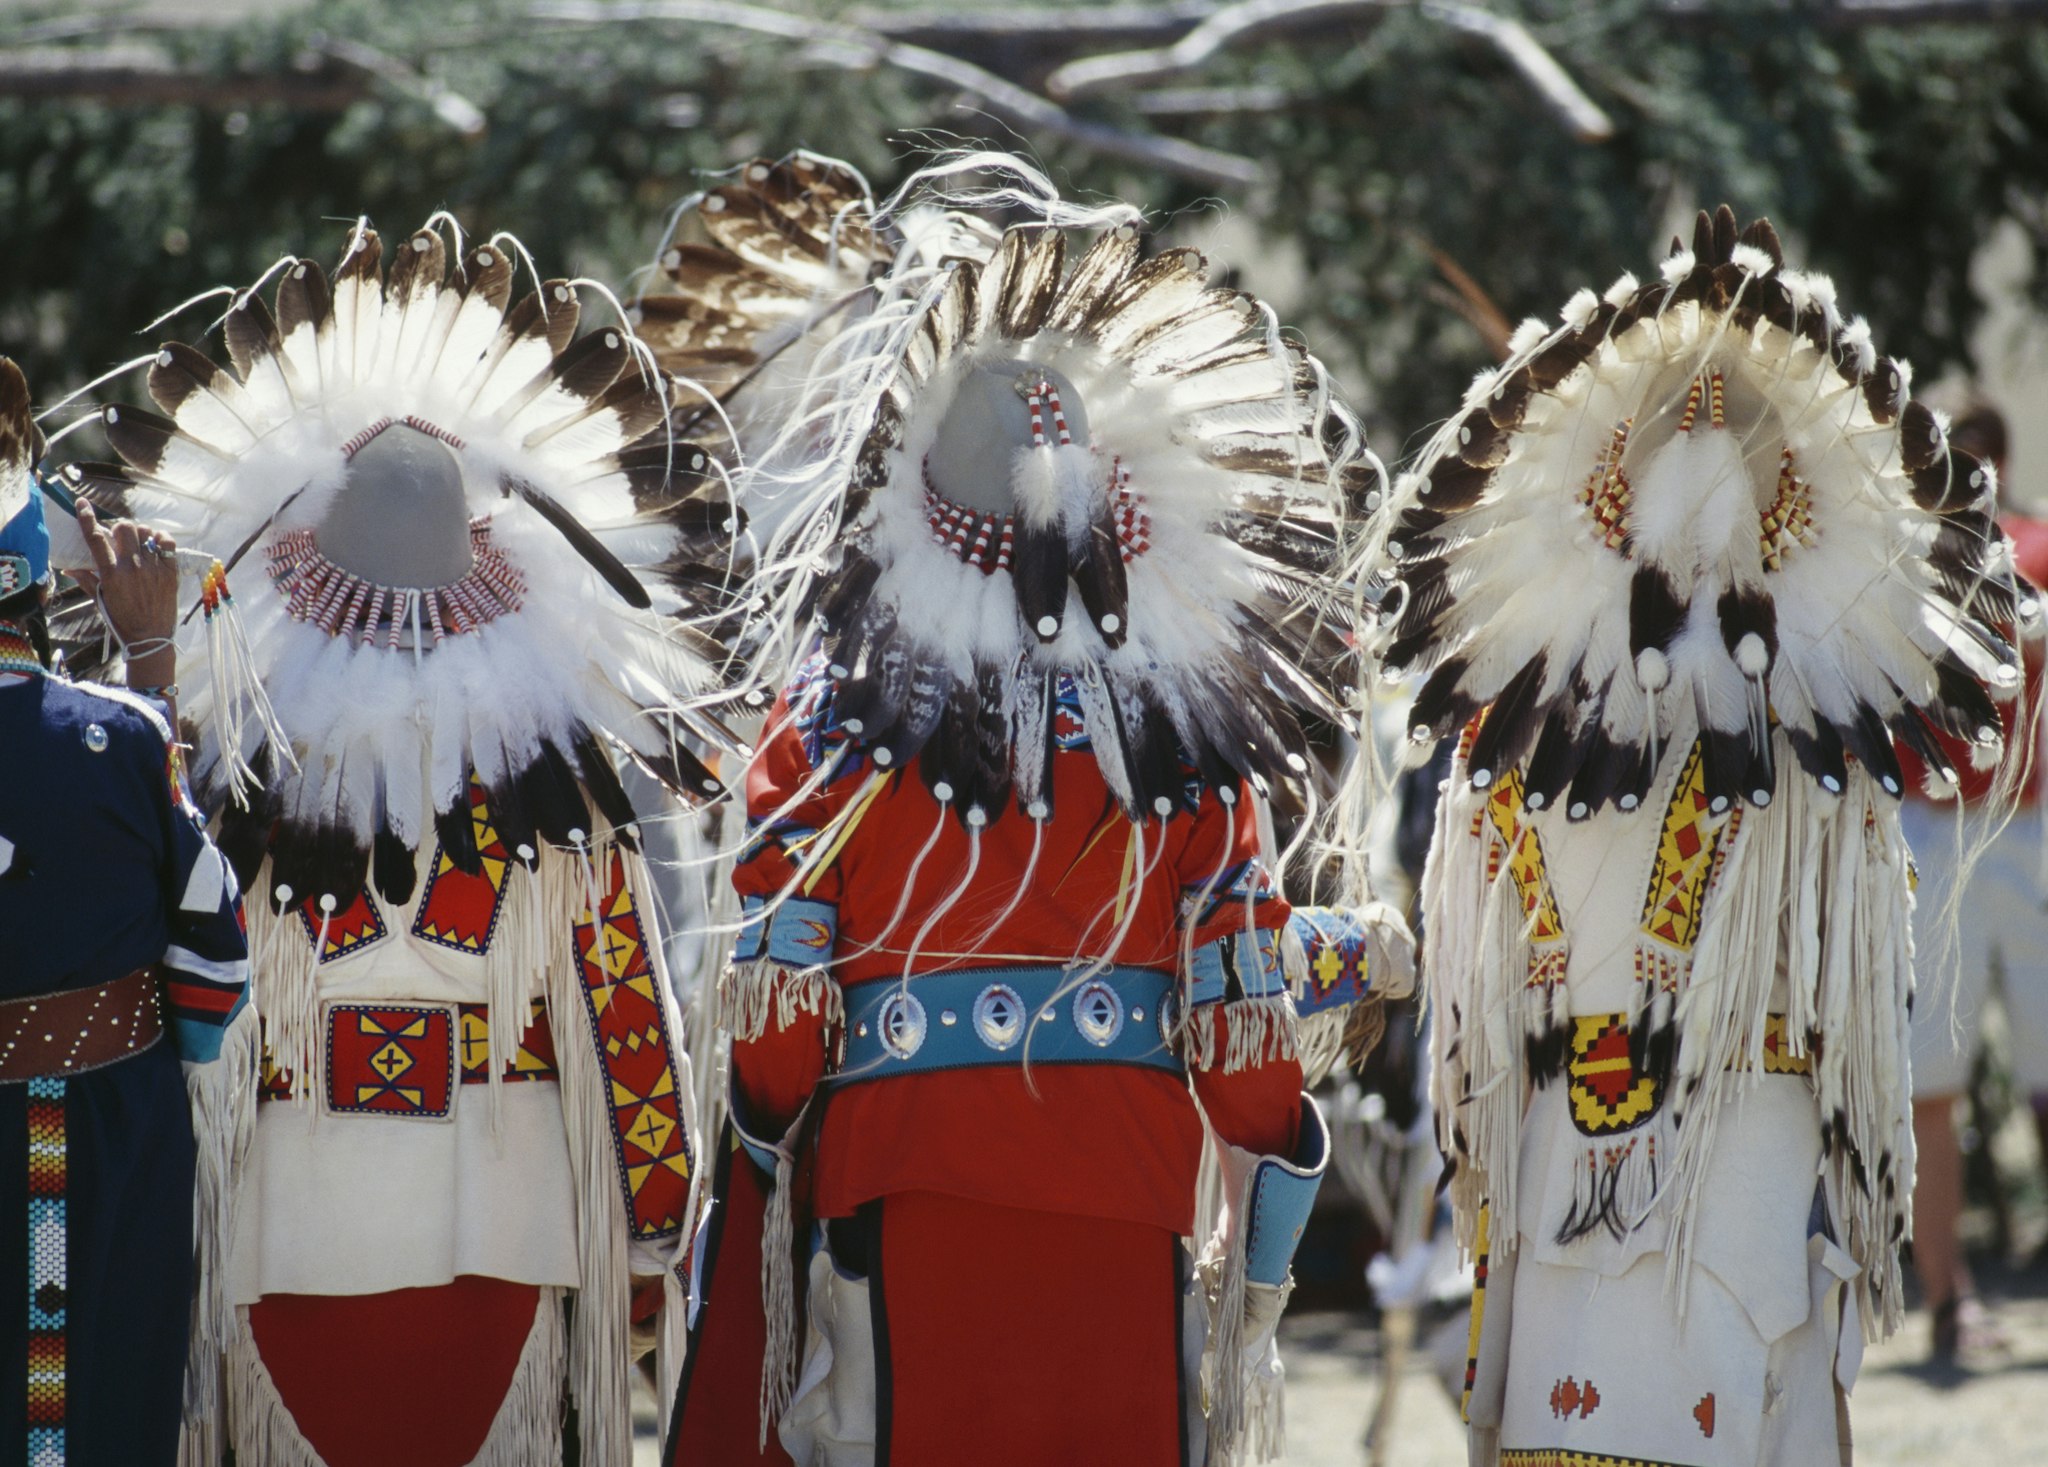 Rear view of three chief's head dresses of eagle feathers.